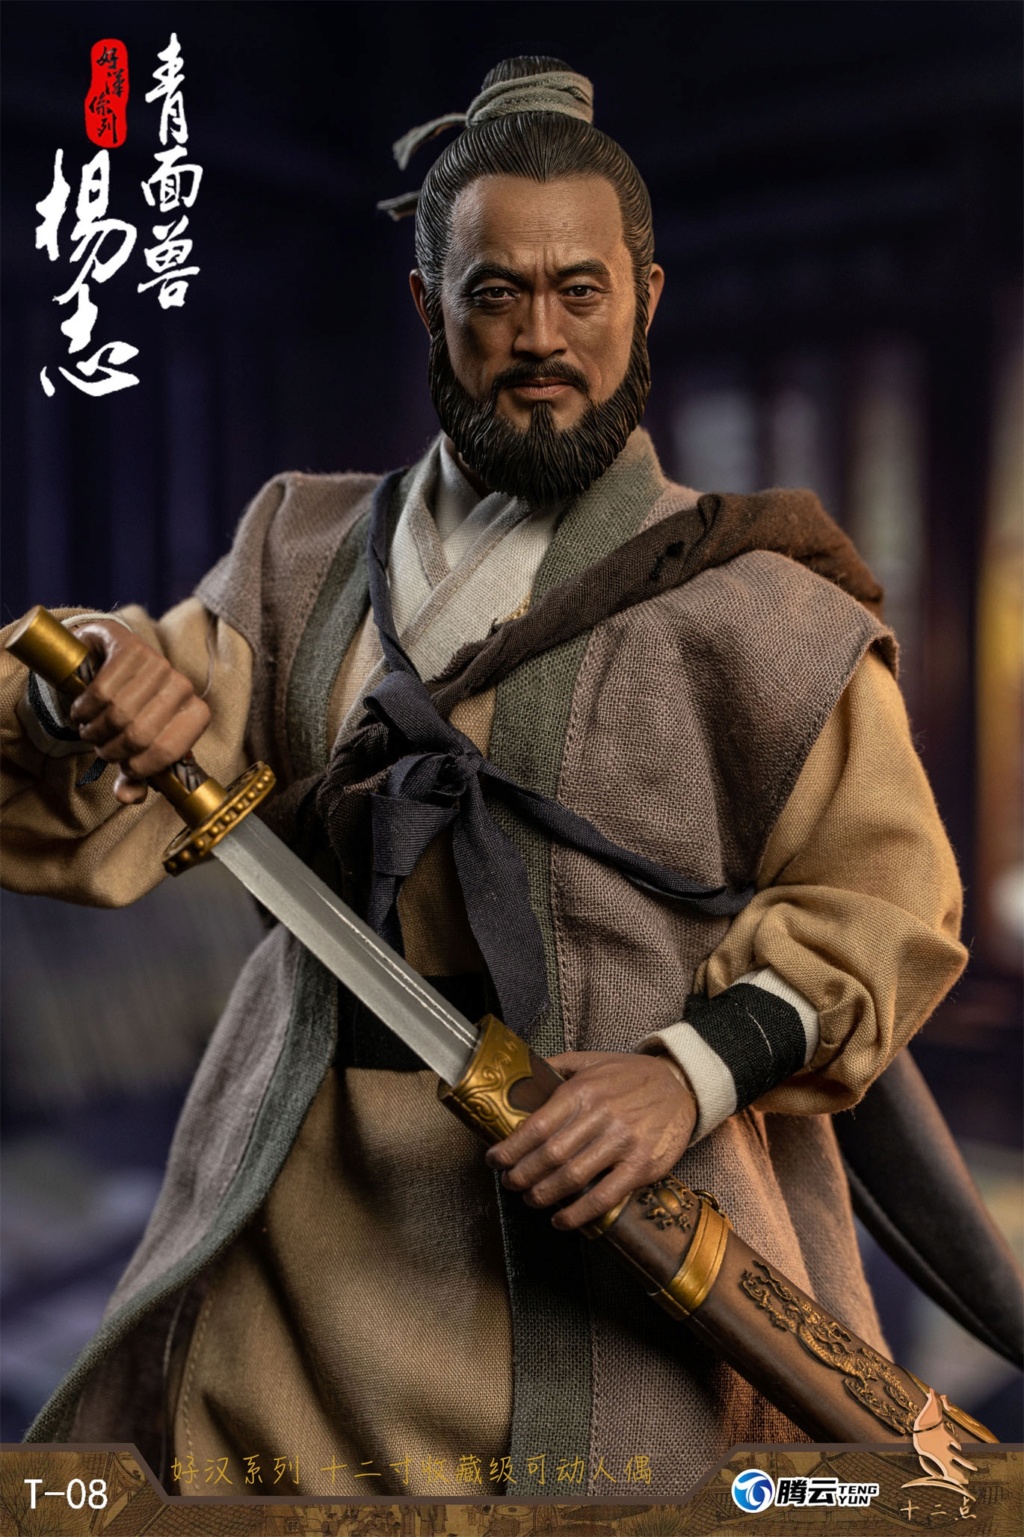 newproduct - NEW PRODUCT: Twelve O'clock: 1/6 Hero Series - Face Beast Yang Zhi (Popular Version) Movable Figure T-08 15094811